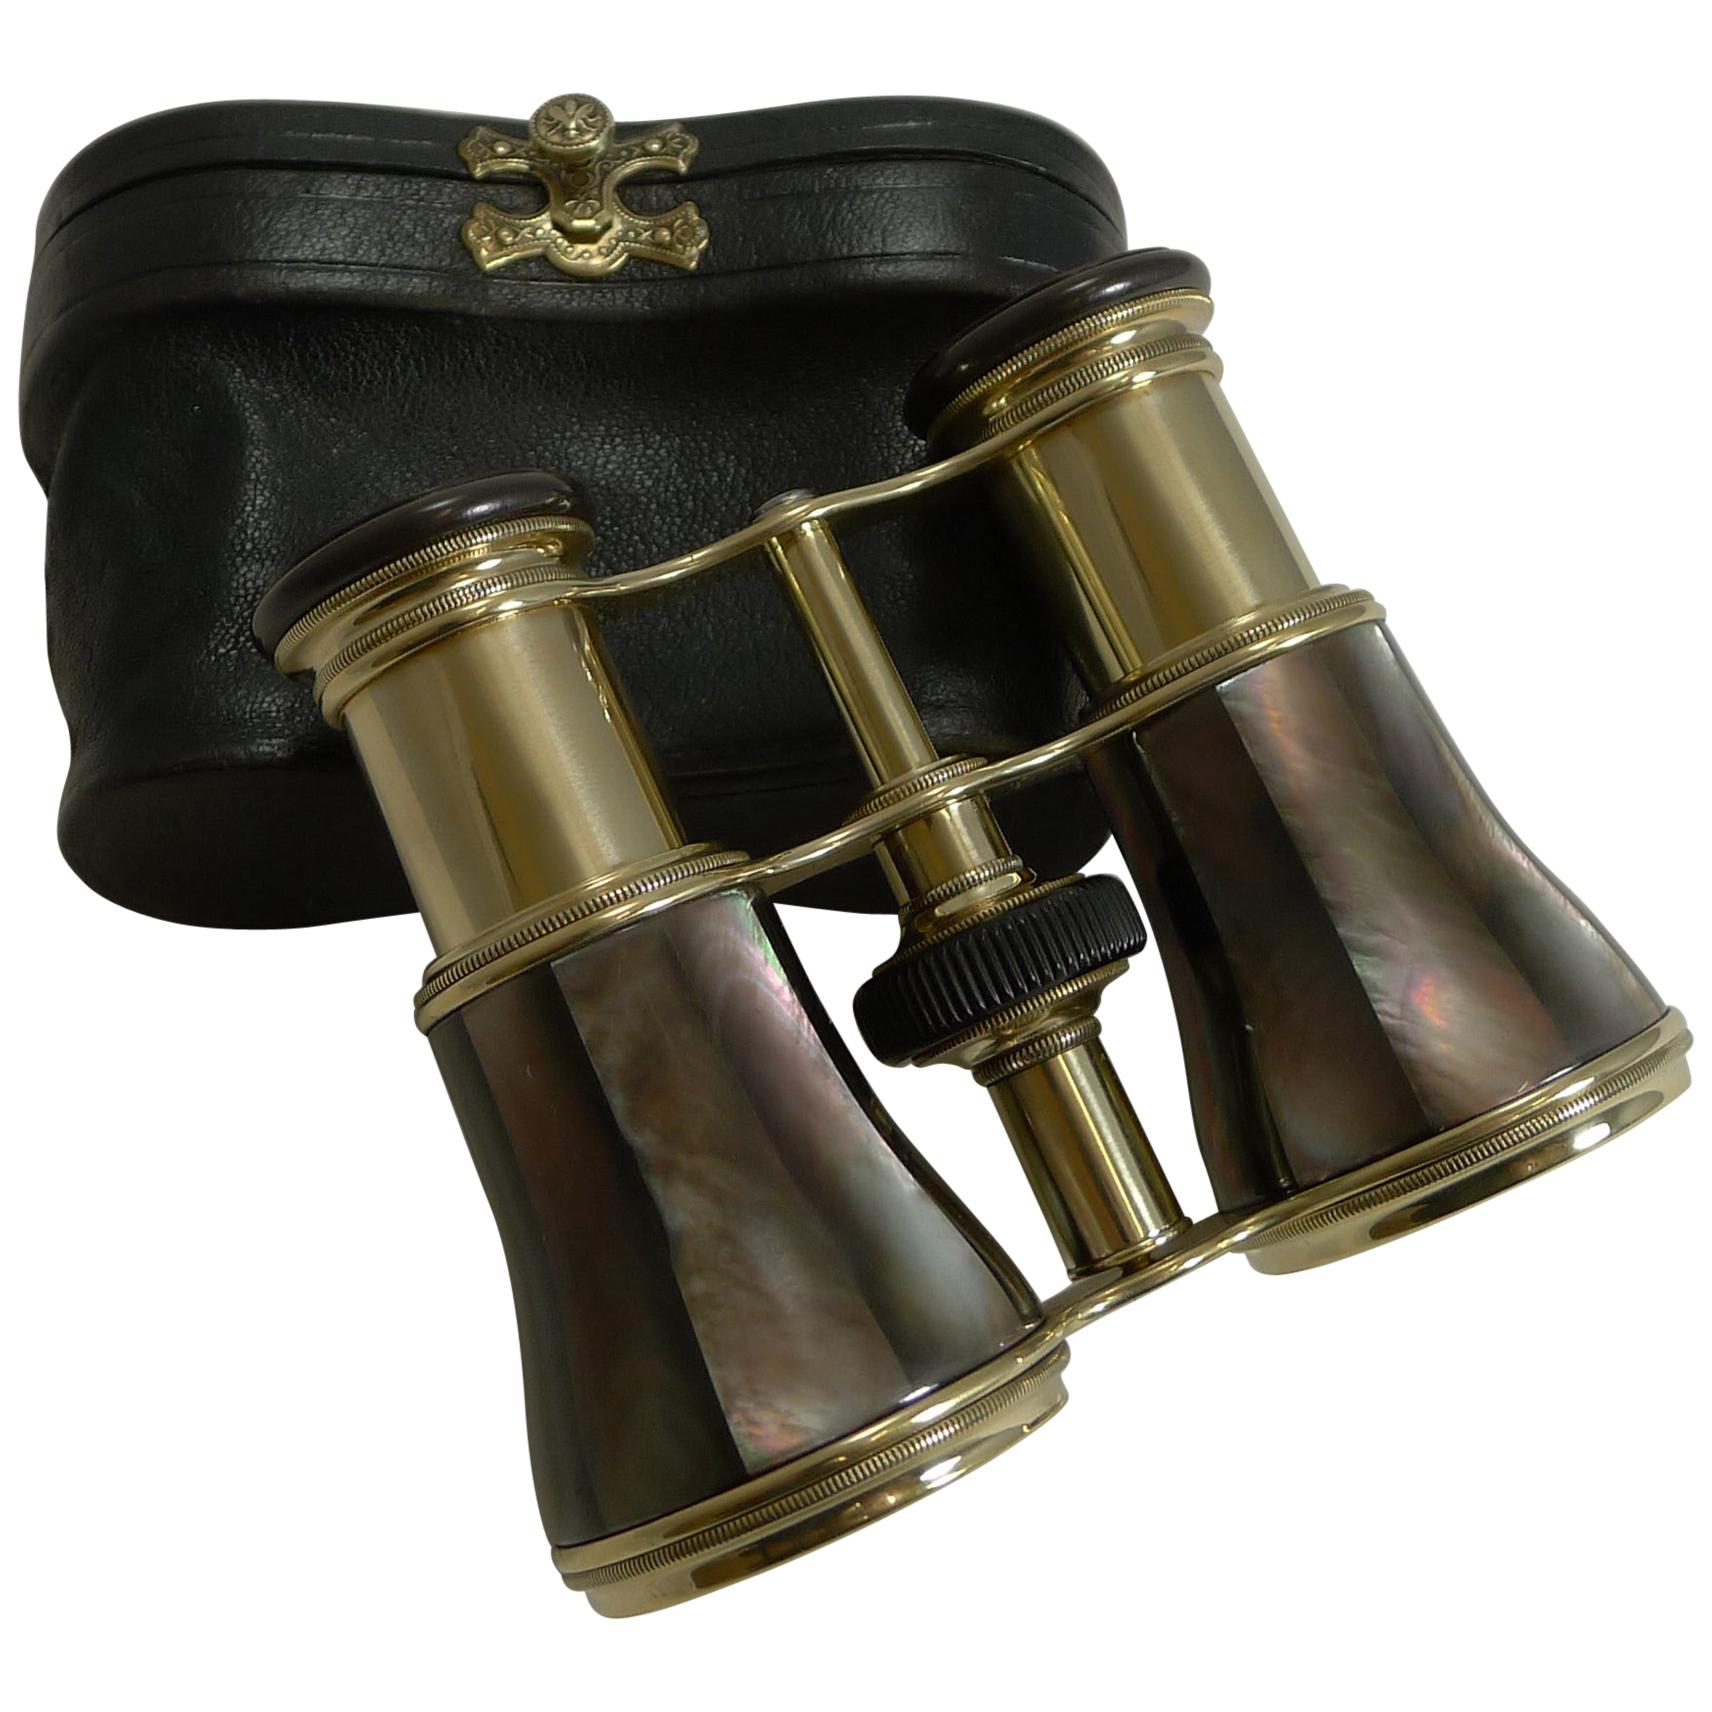 A truly exquisite pair of Opera Glasses by the top-notch maker, LeMaire of Paris